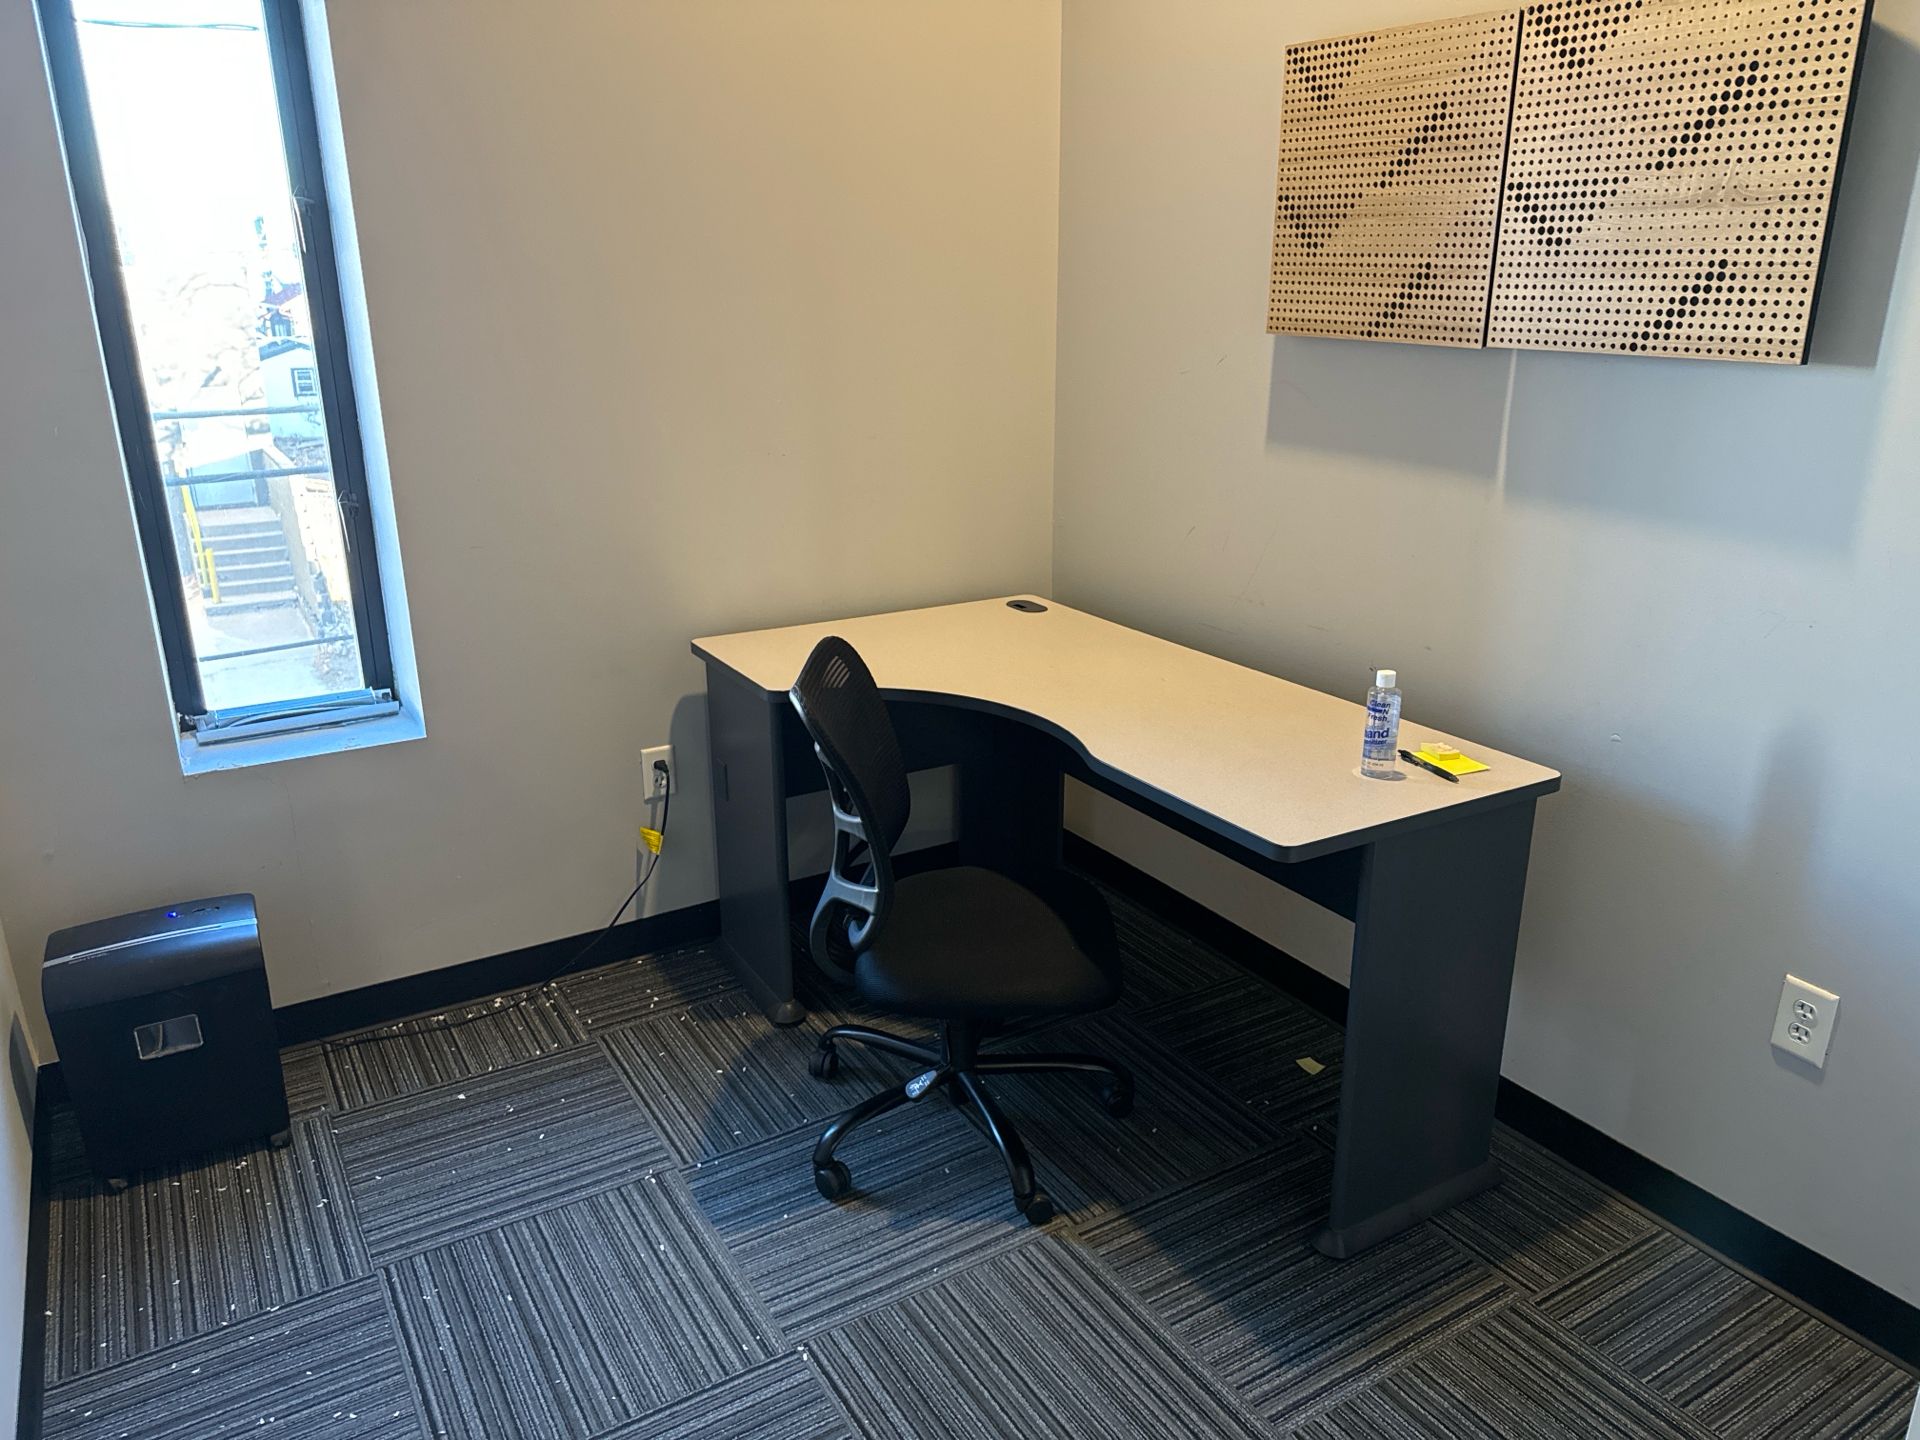 LOT: Contents of (3) Offices: (5) Chairs, (3) Work Stations, LG 30" TV